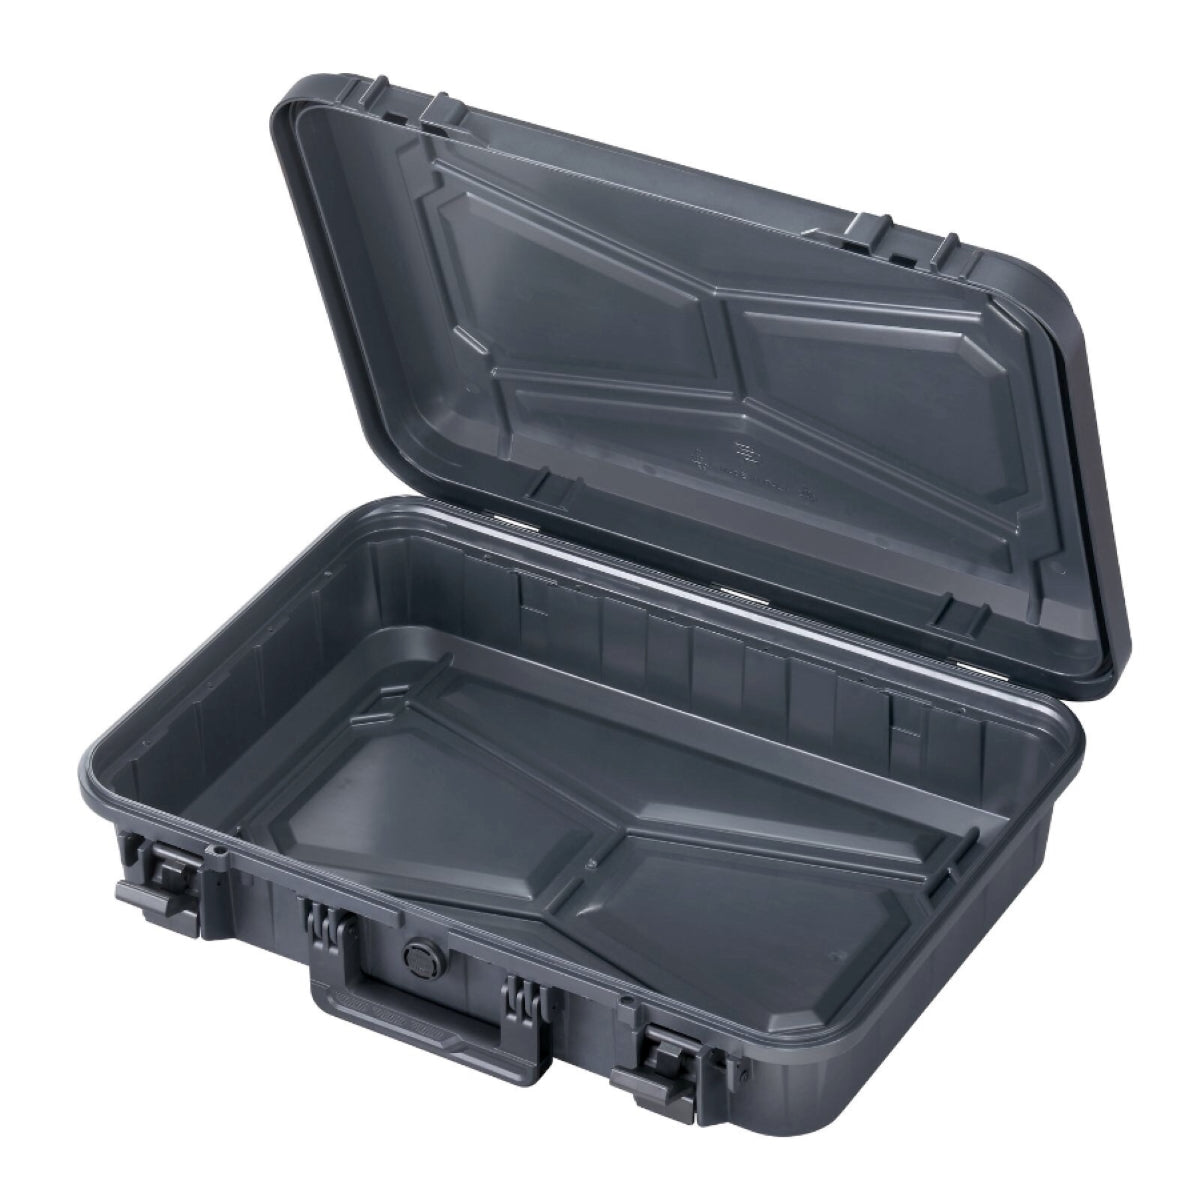 SP ECO 90 Grey Carry Case, Empty w/ Convoluted Foam in Lid, ID: L520xW350xH125mm